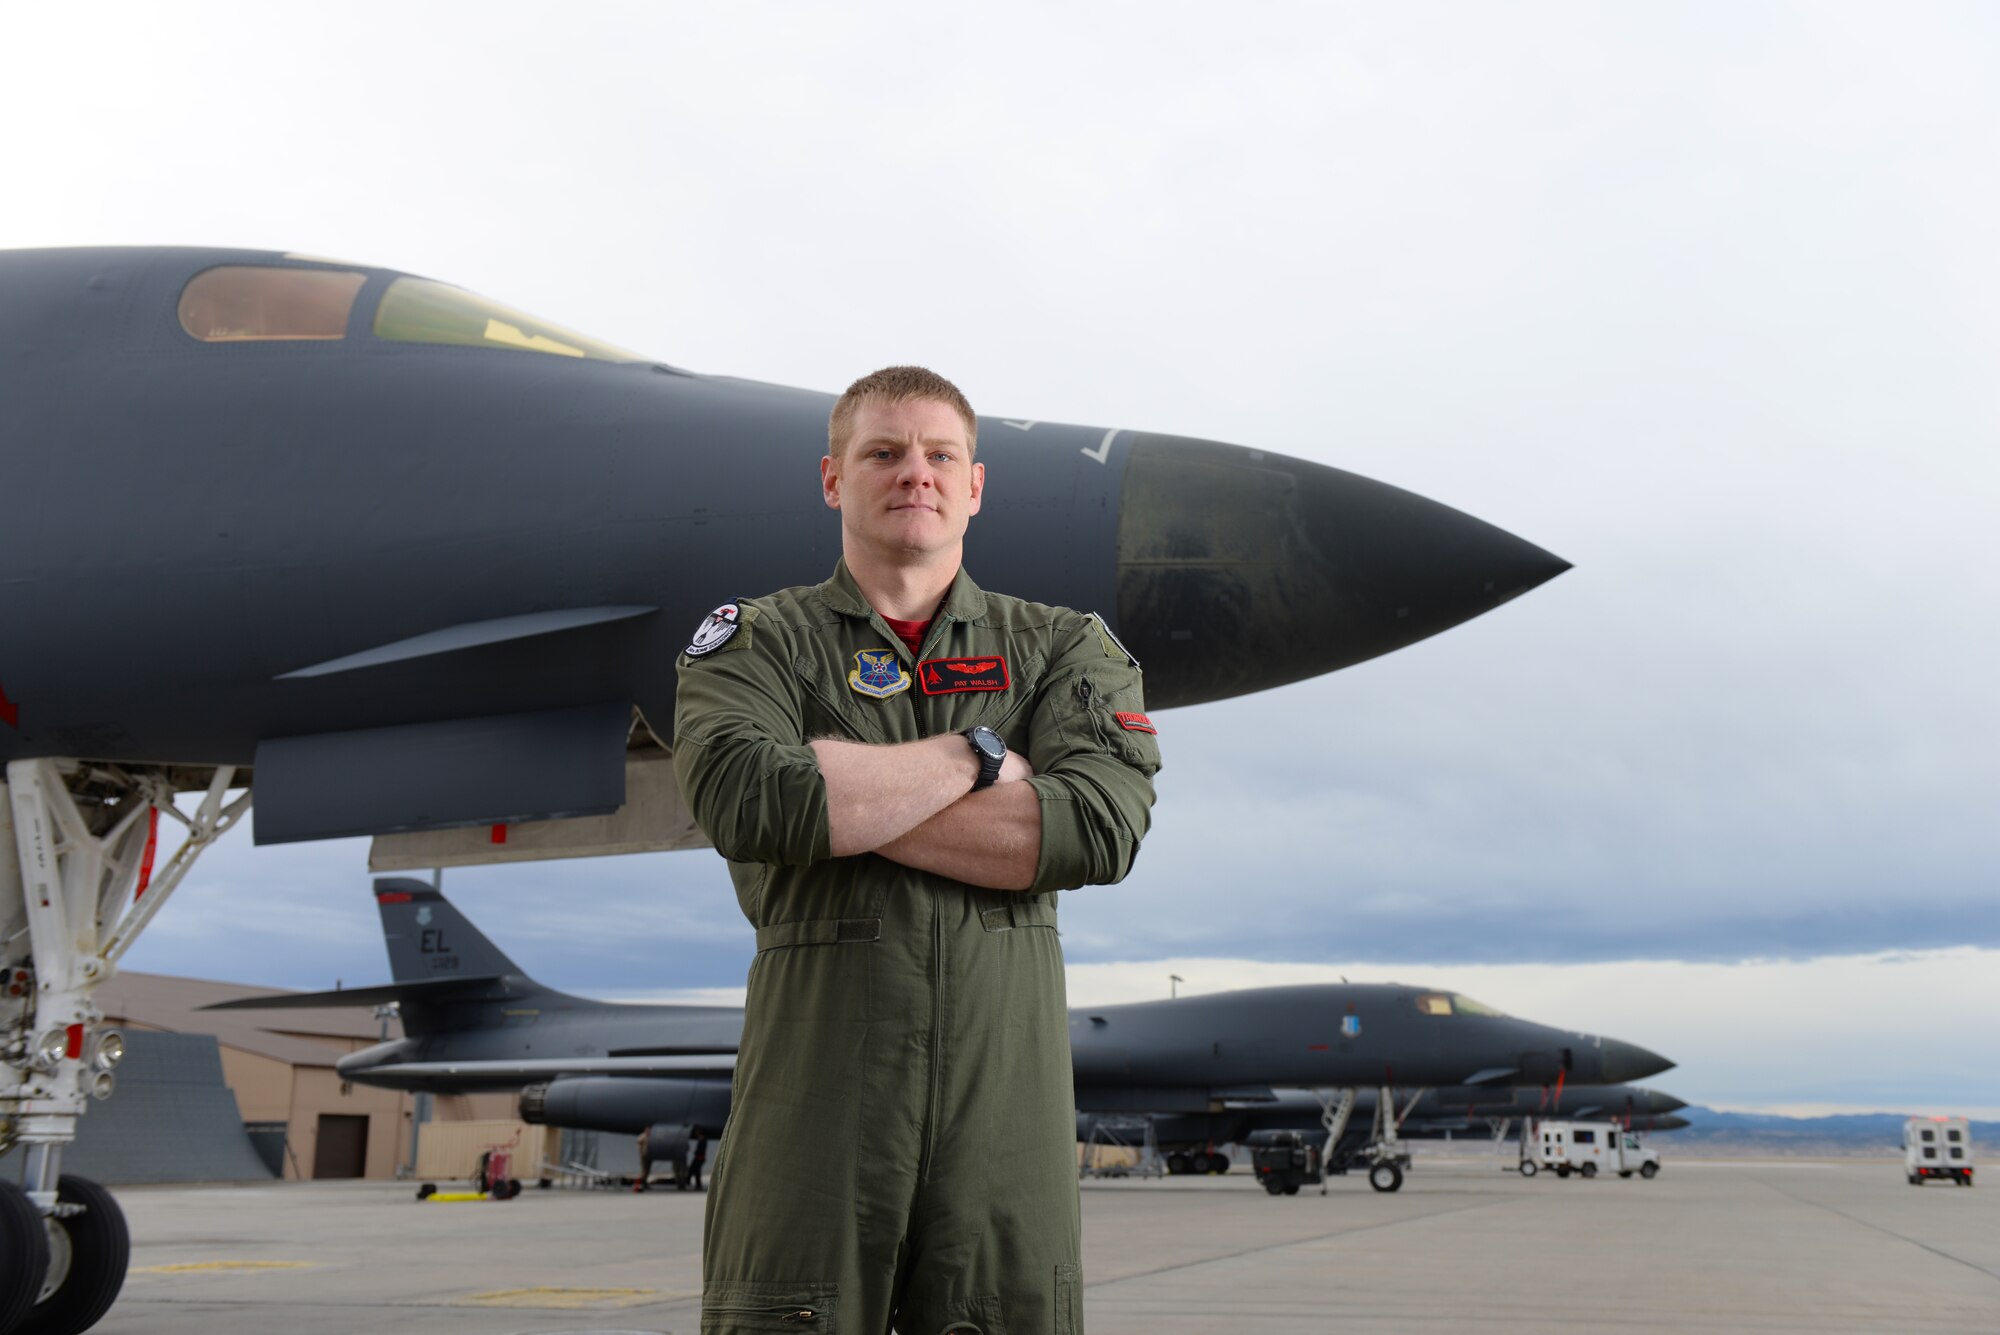 Capt. Patrick Walsh, a 34th Bomb Squadron weapon system officer, won the 2018 Air Force Robbie Risner Award recipient in Las Vegas on Dec. 15, 2018. The Robbie Risner award is bestowed to the Air Force weapons officer who makes the greatest combat impact in their first year after graduation from the Weapons Instructor Course at Nellis Air Force Base, Nevada. (U.S. Air Force photo by Airman 1st Class Nicolas Z. Erwin)